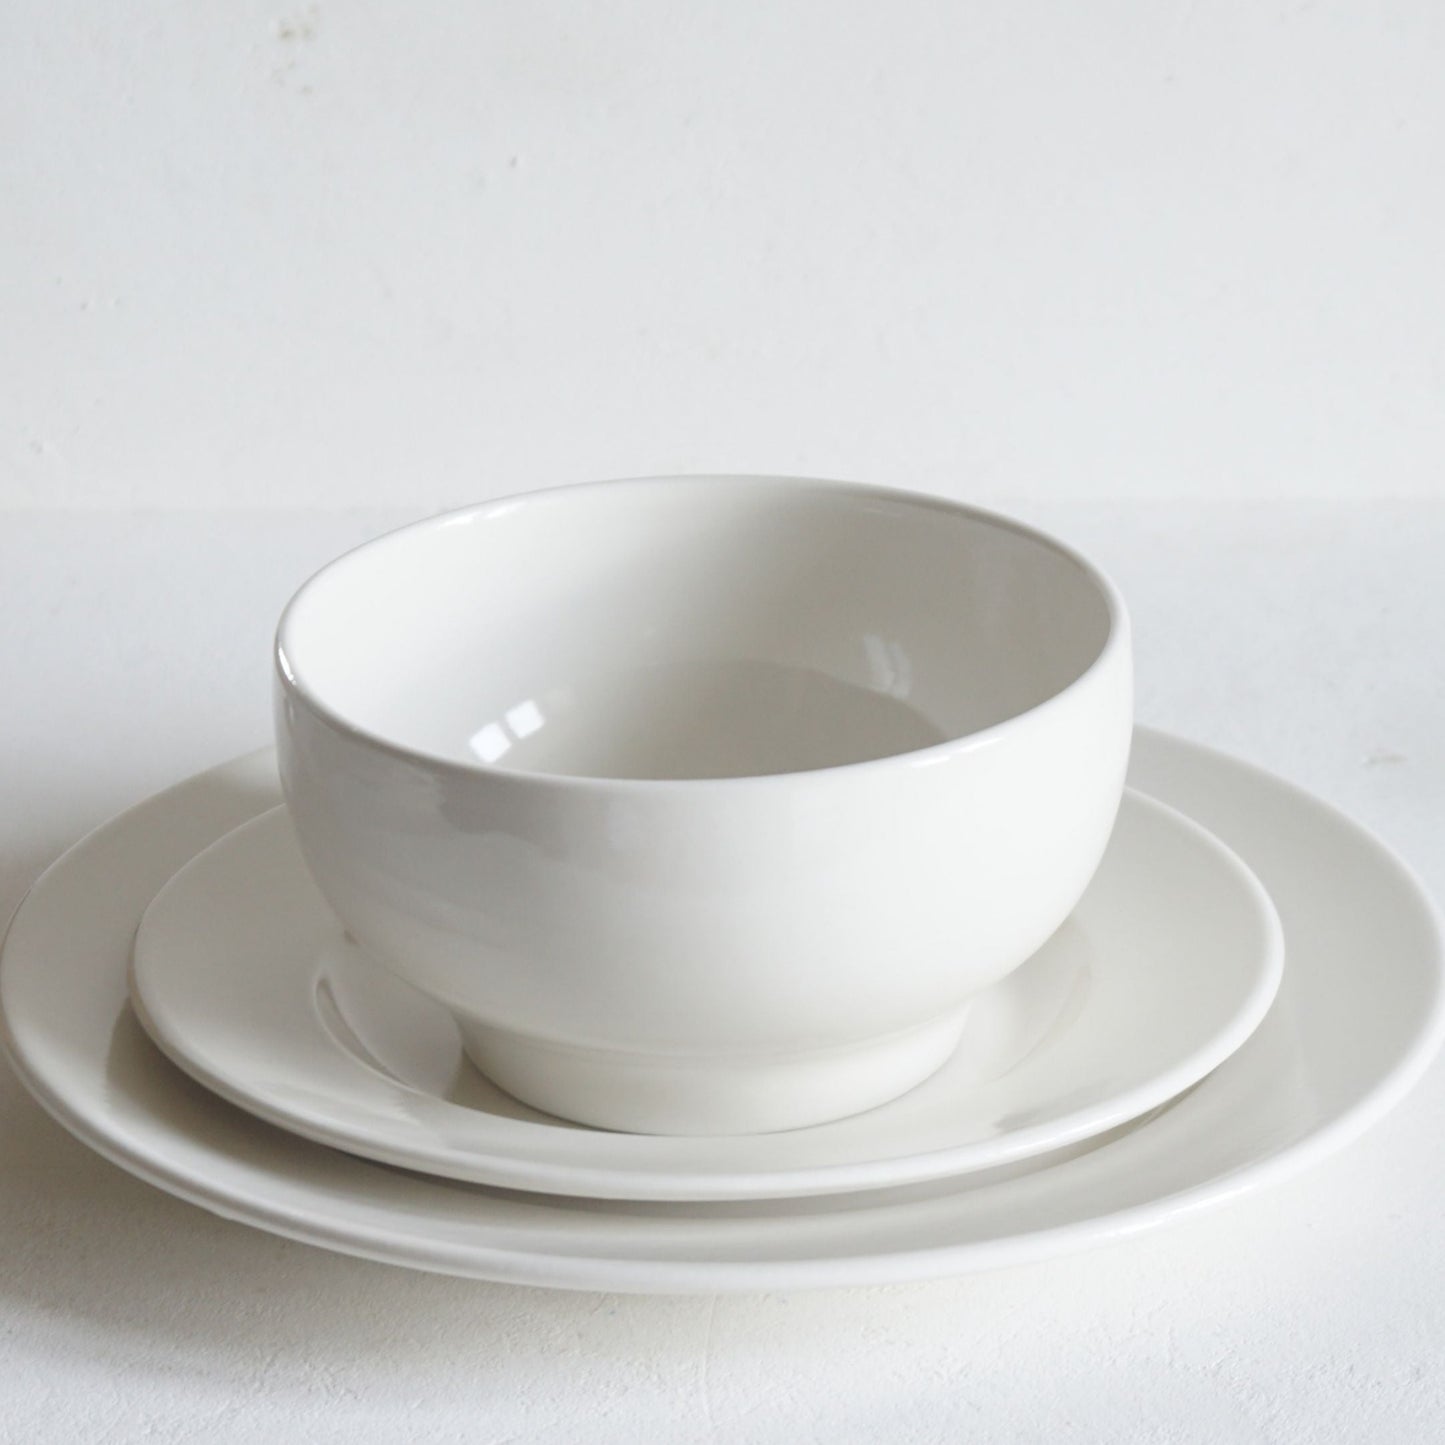 Three piece dinnerware set including Plain Porcelain Side Plate, Dinner Plate and Simple Bowl